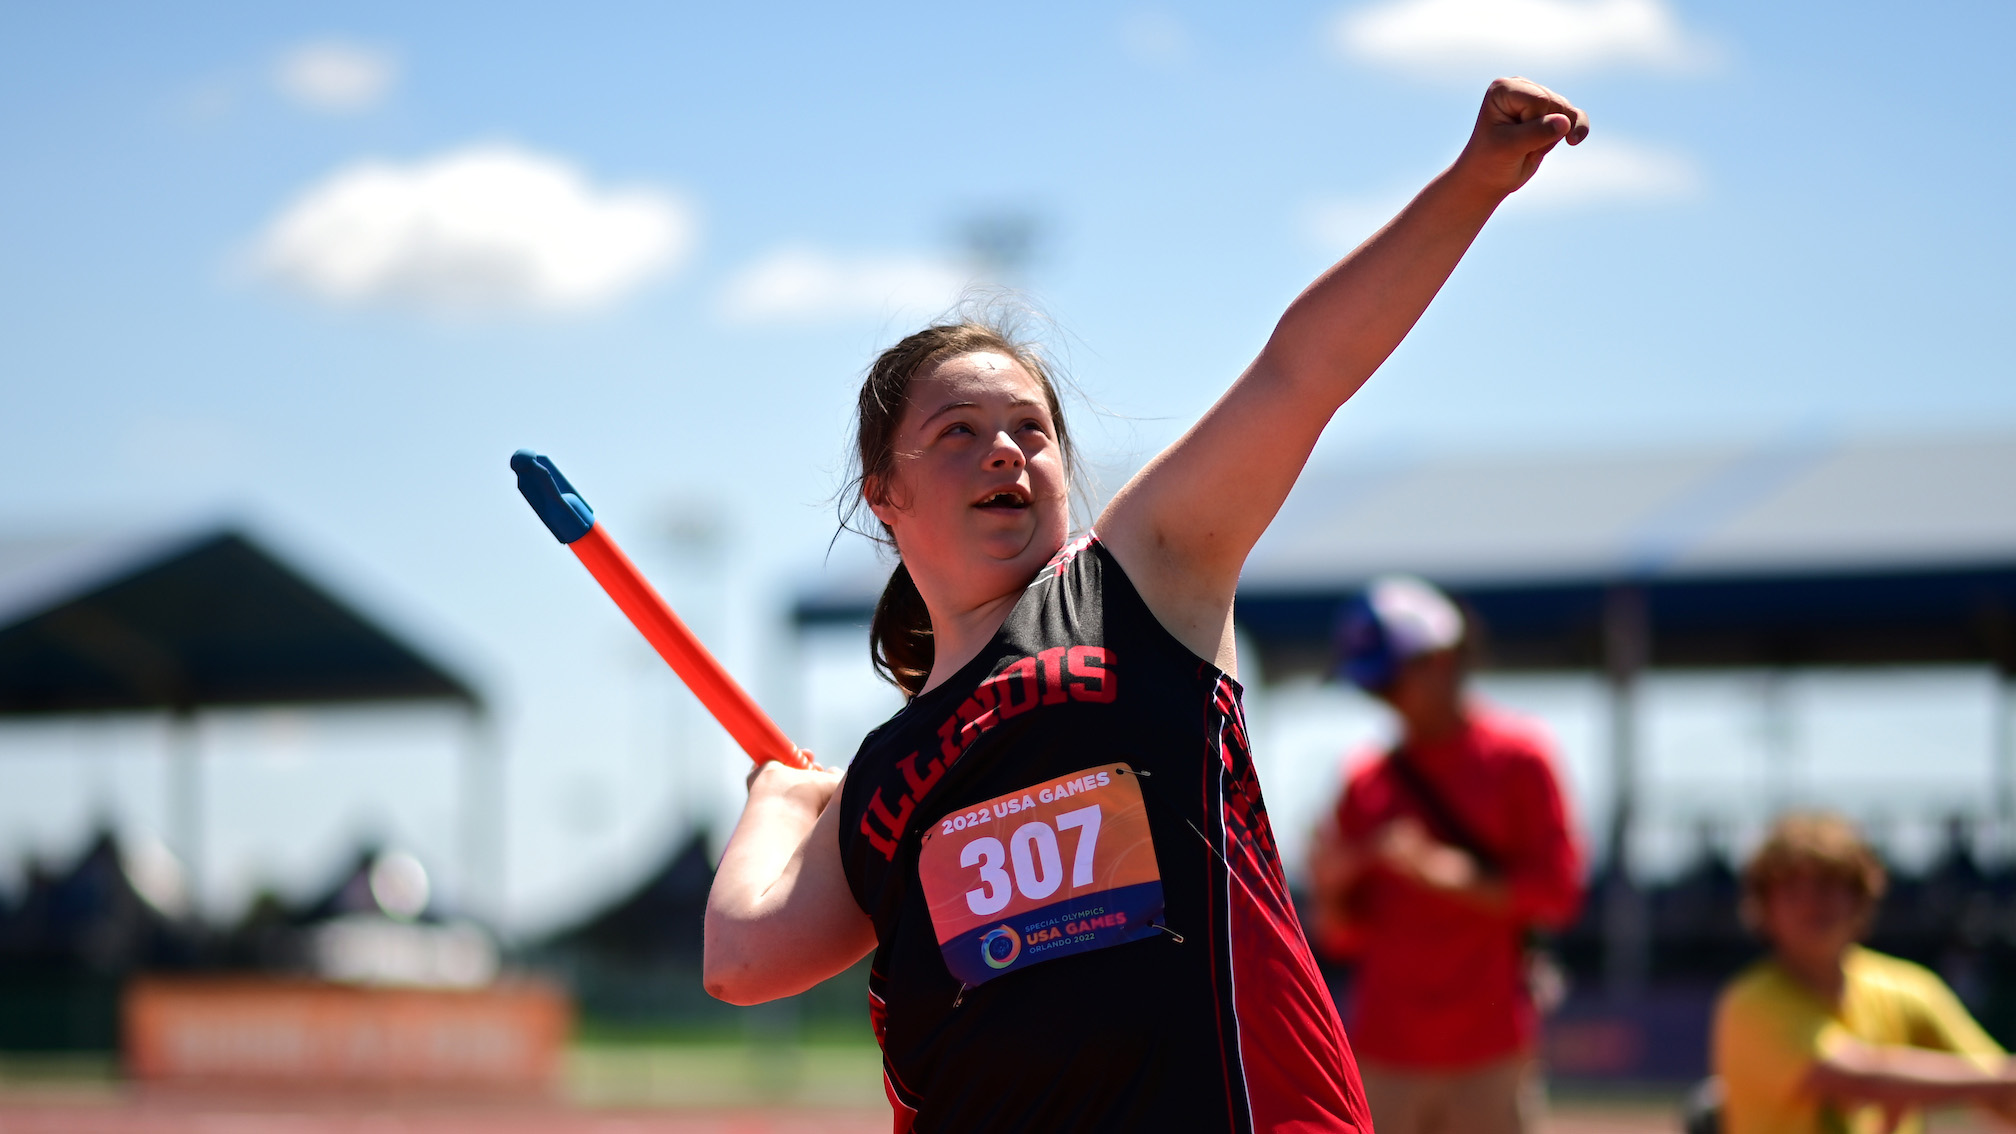 A photo of an athlete of team Illinois throwing a javelin during the 2022 Special Olympics USA Games.